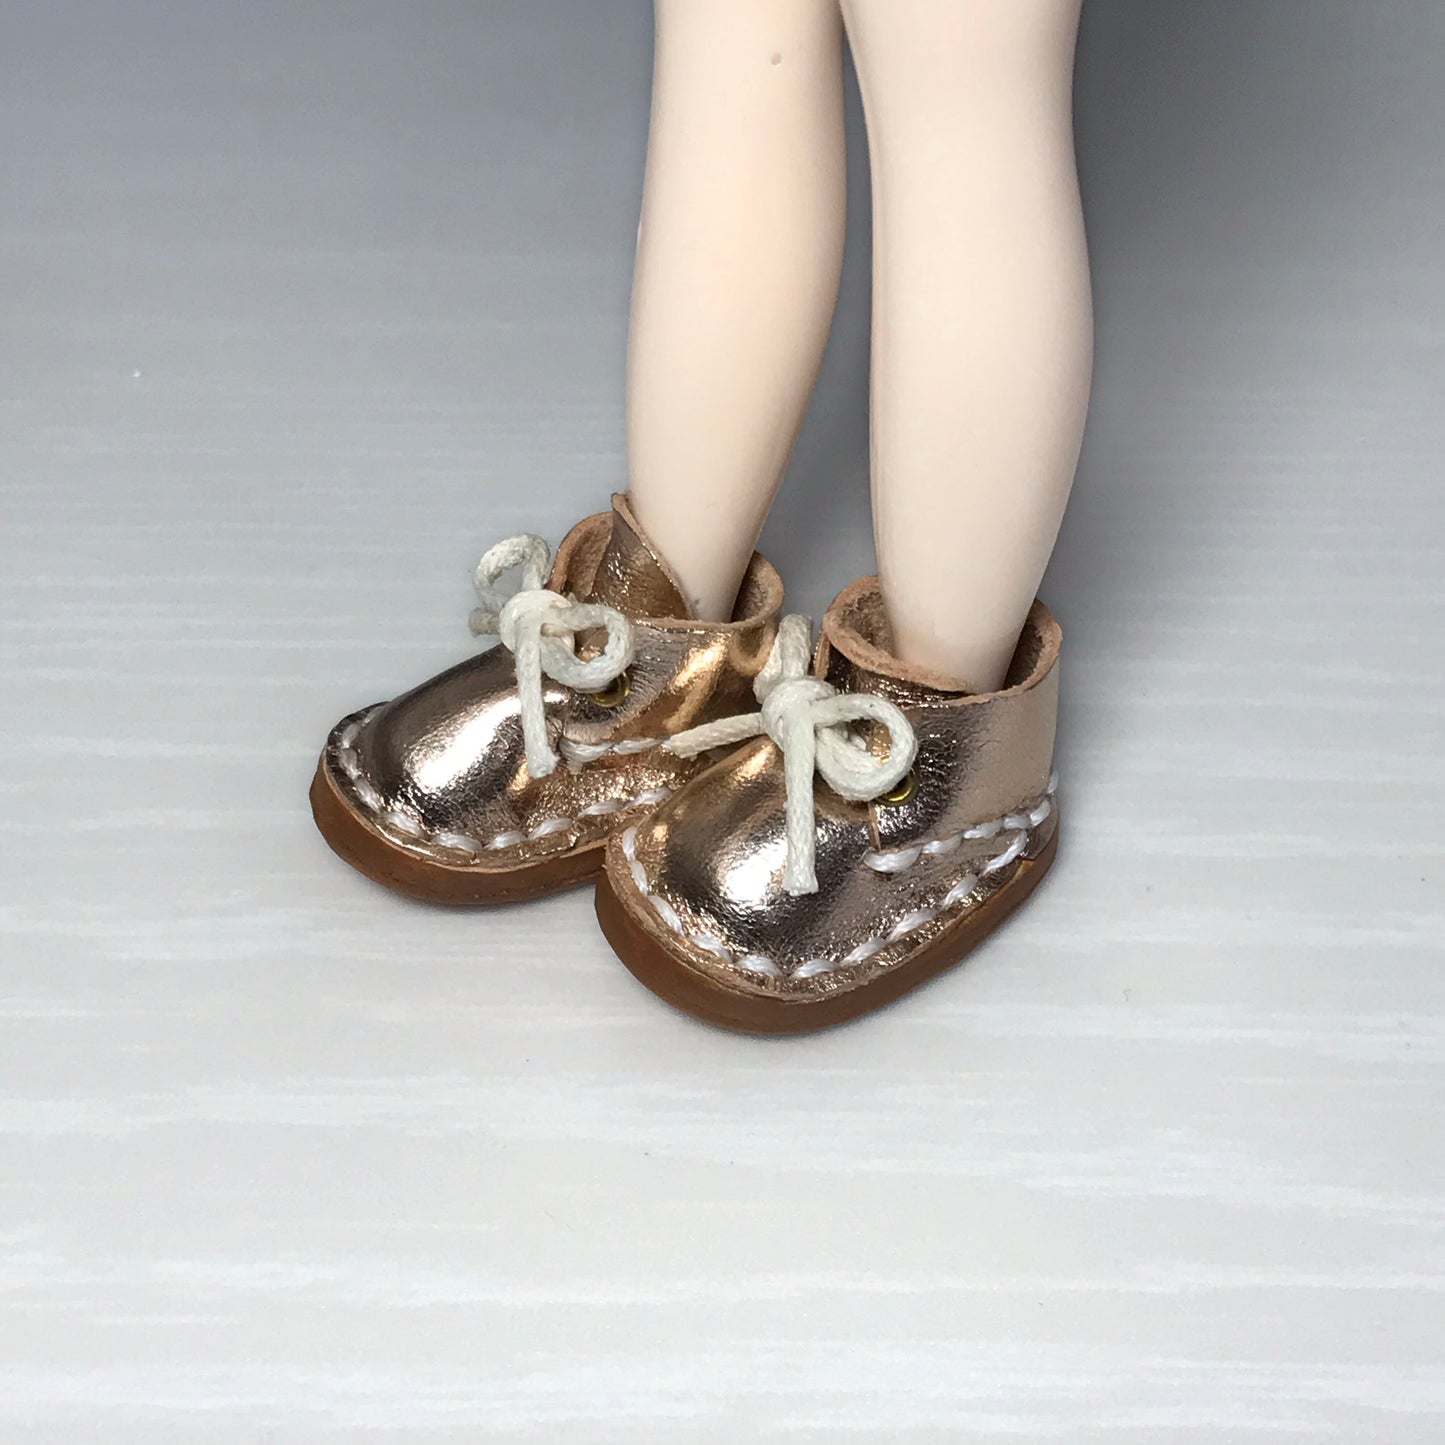 Shoes for doll (Neo Blythe size) "Short Boots"